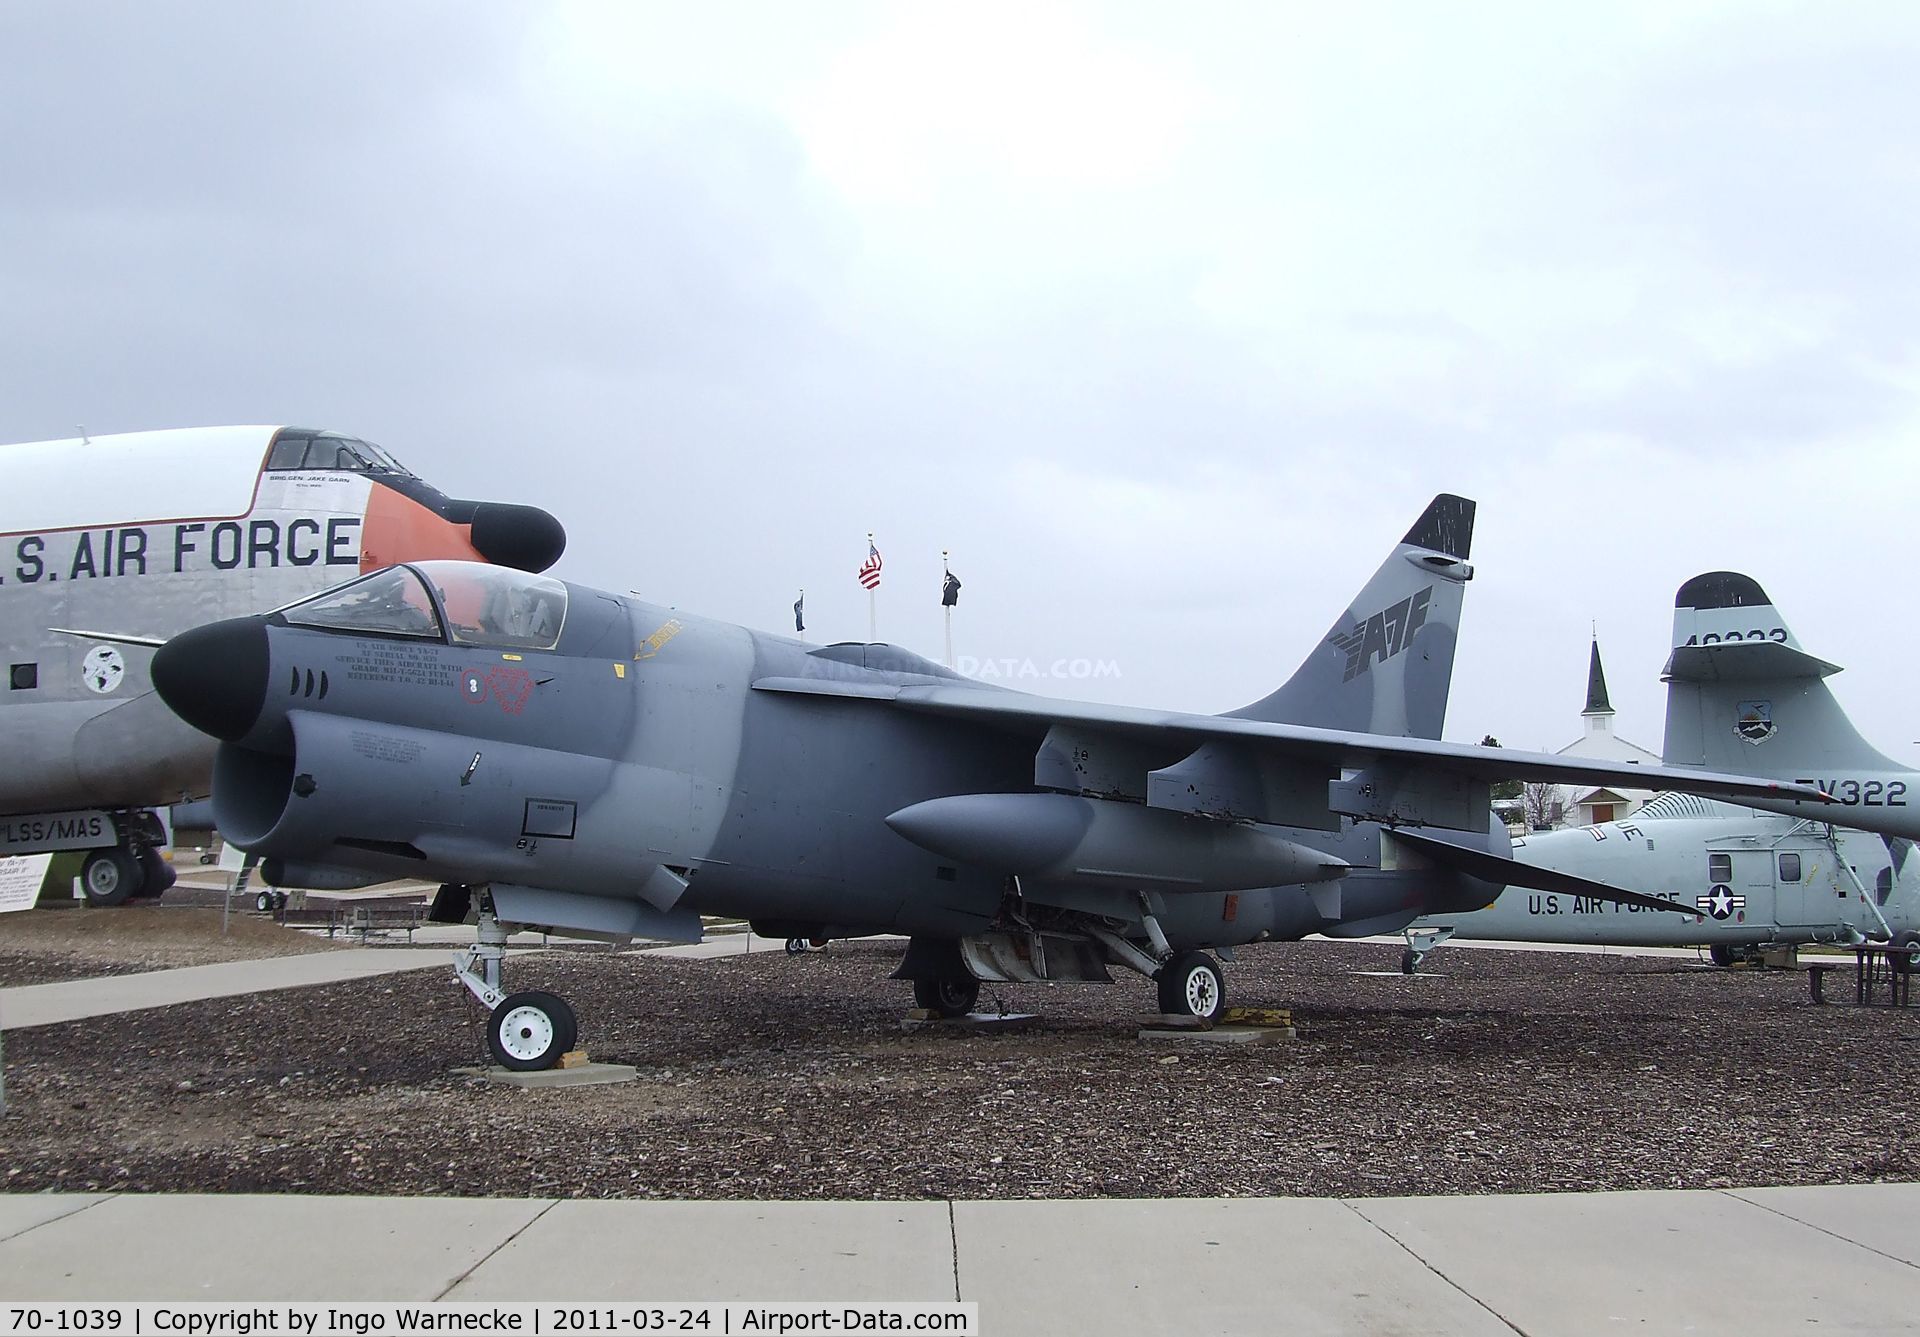 70-1039, LTV YA-7F Corsair II C/N D-185, LTV YA-7F Corsair II - also known as 